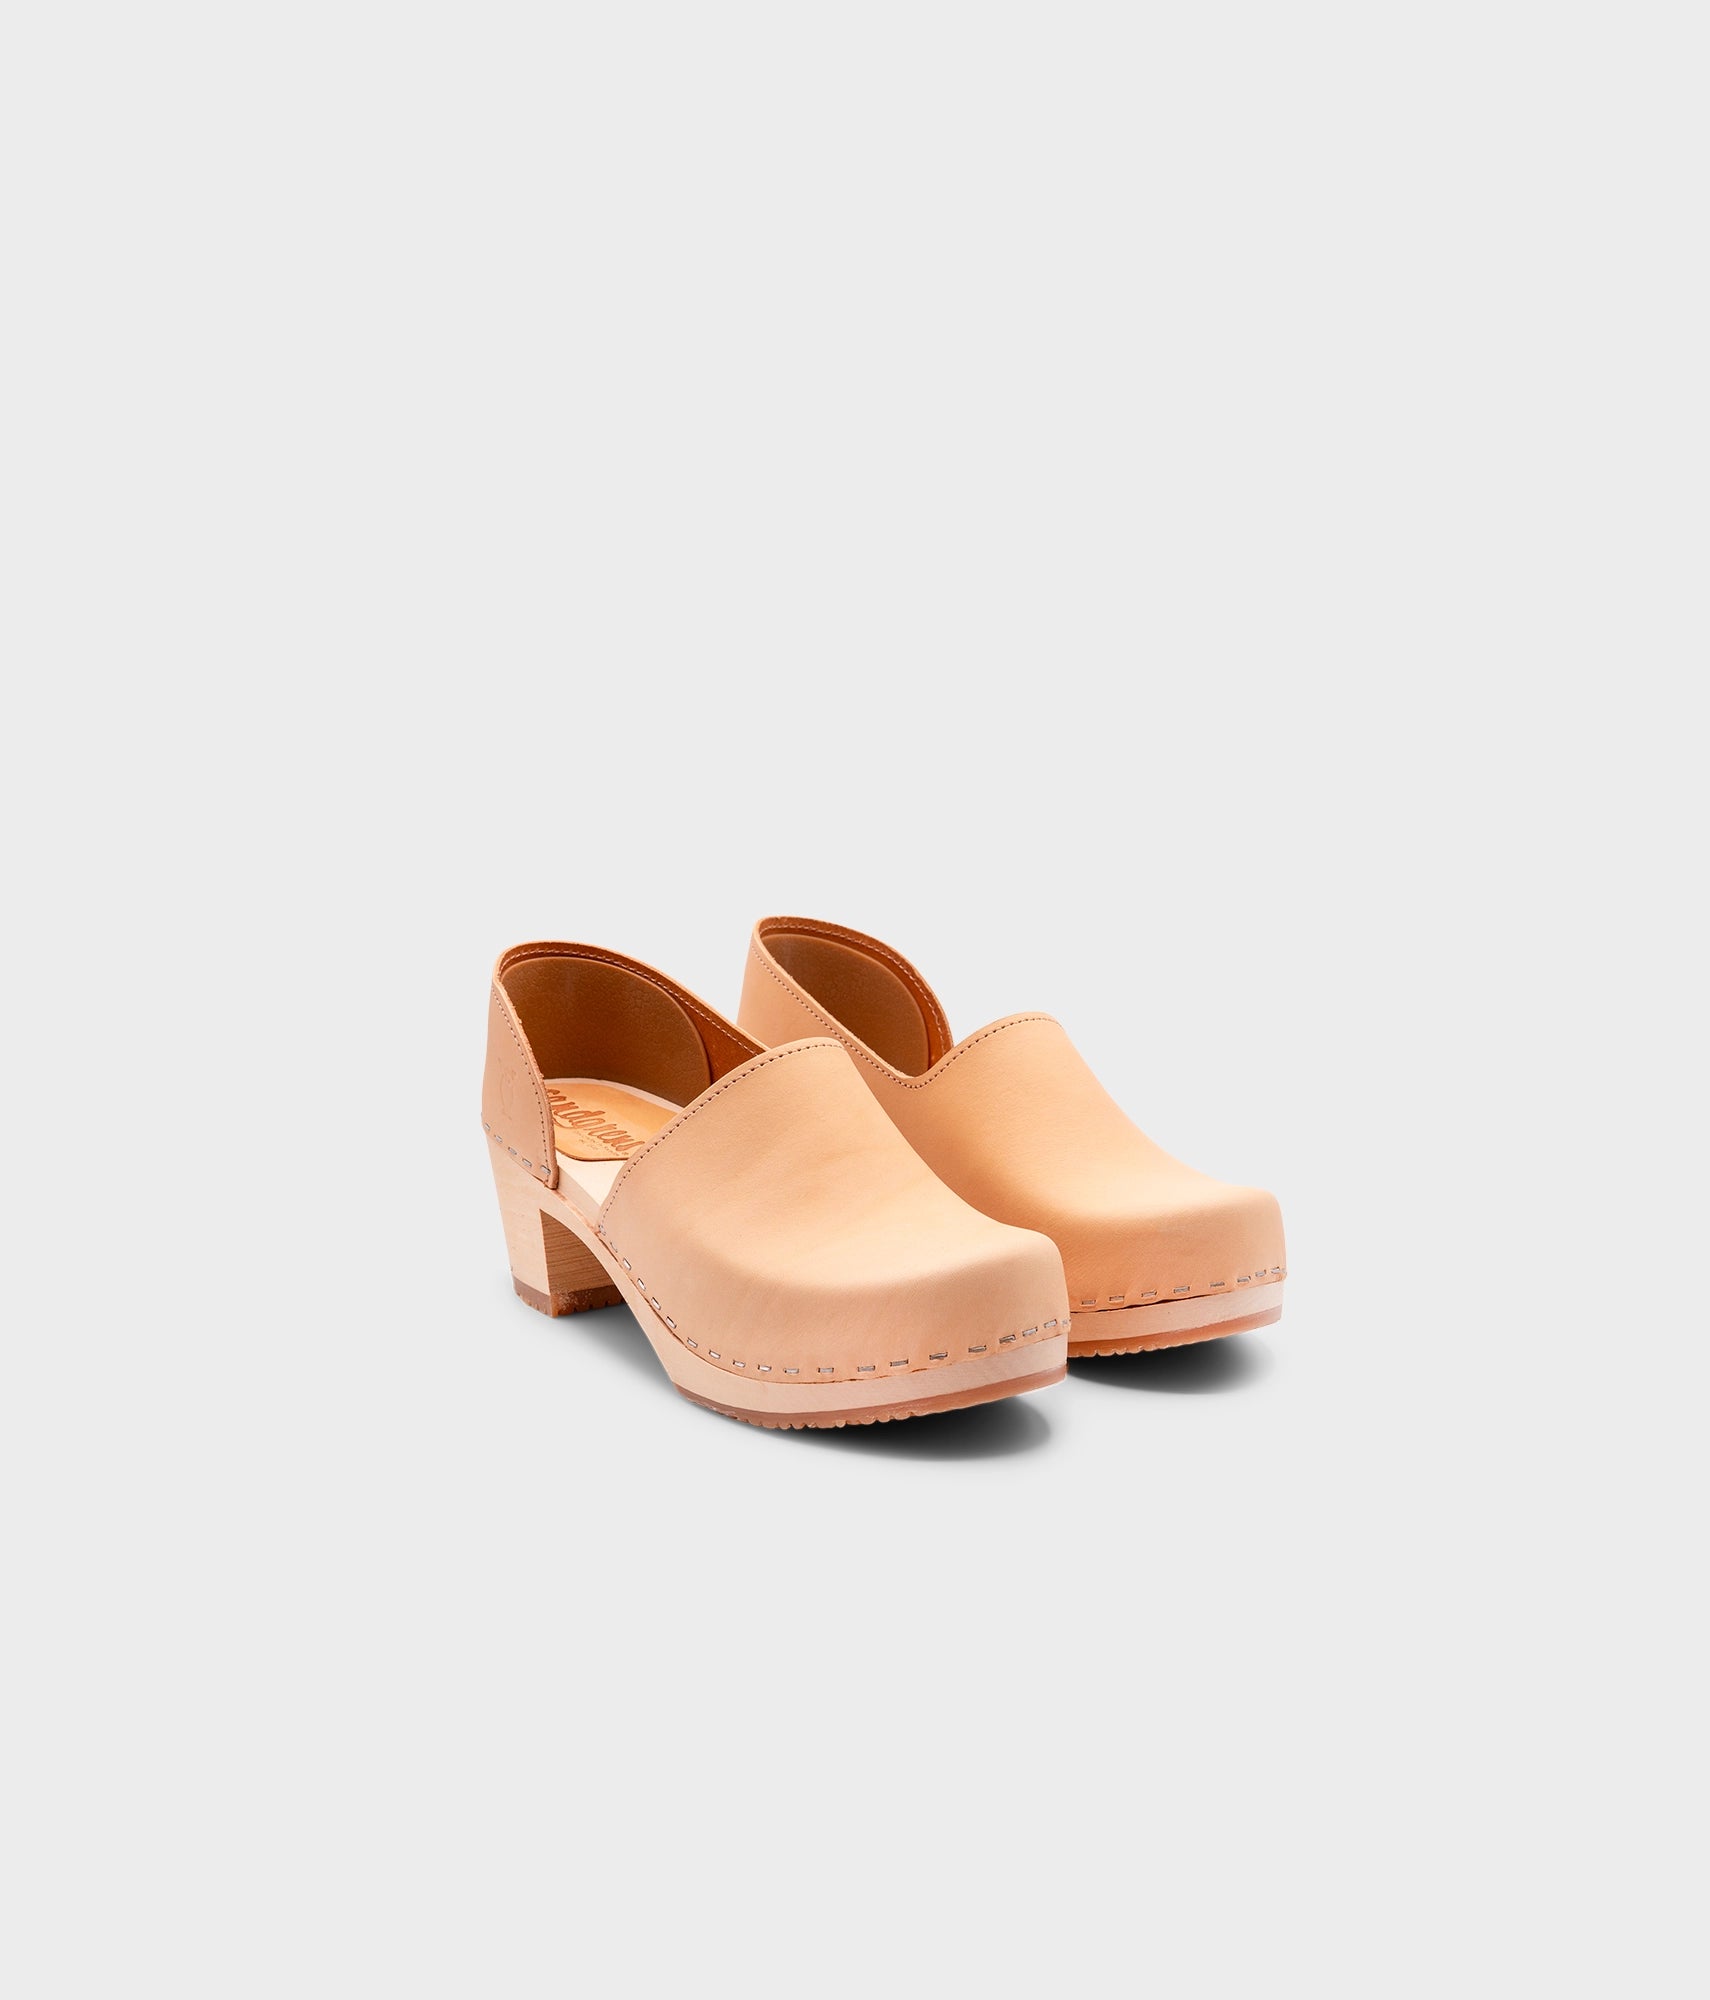 high heeled closed-back clogs in beige ecru vegetable tanned leather stapled on a light wooden base